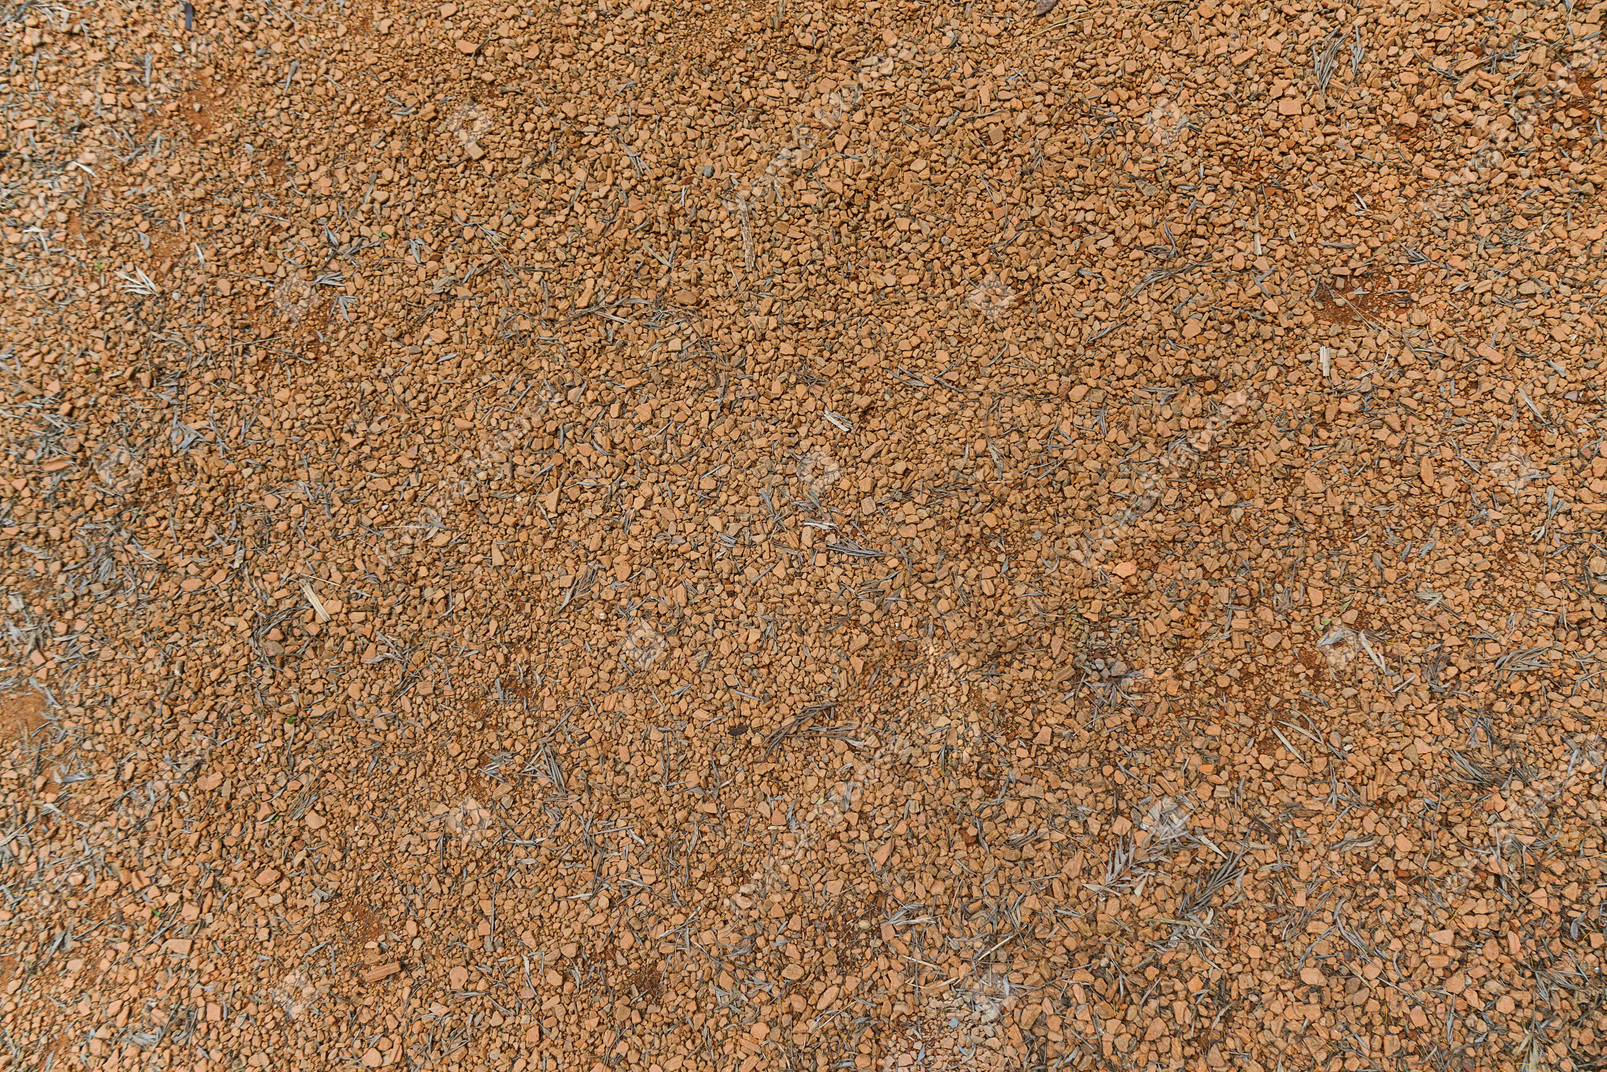 Brown crushed stones